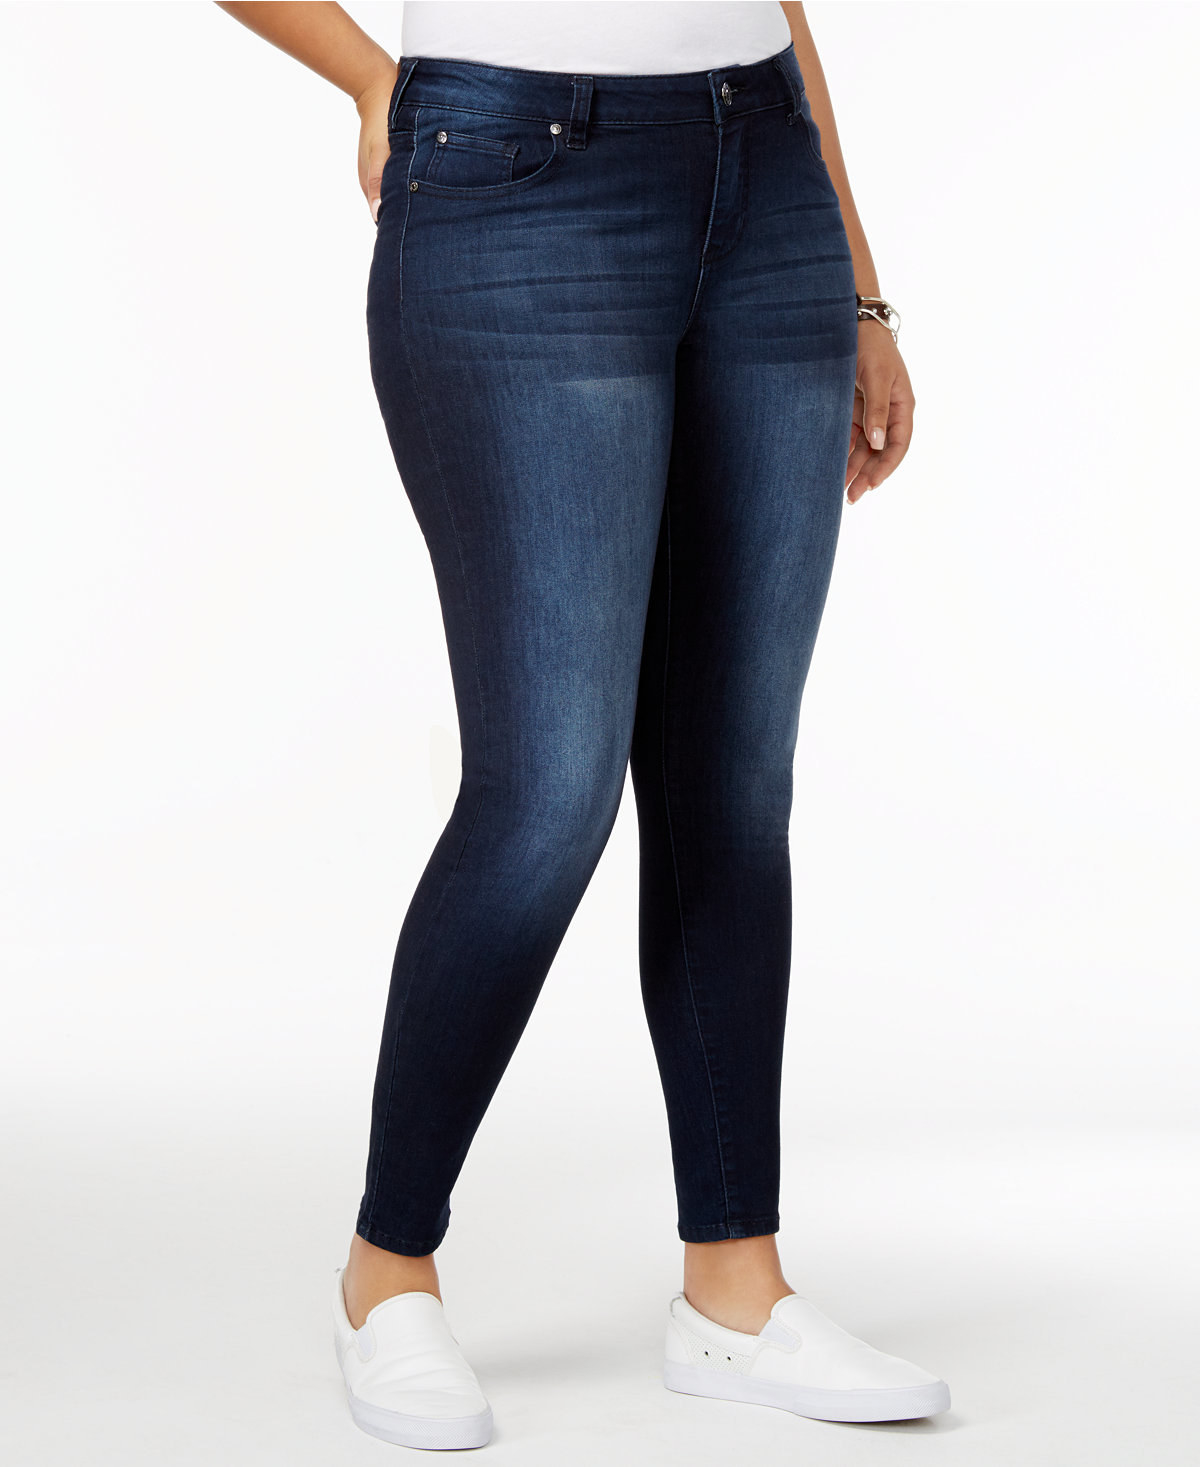 softest jeans womens